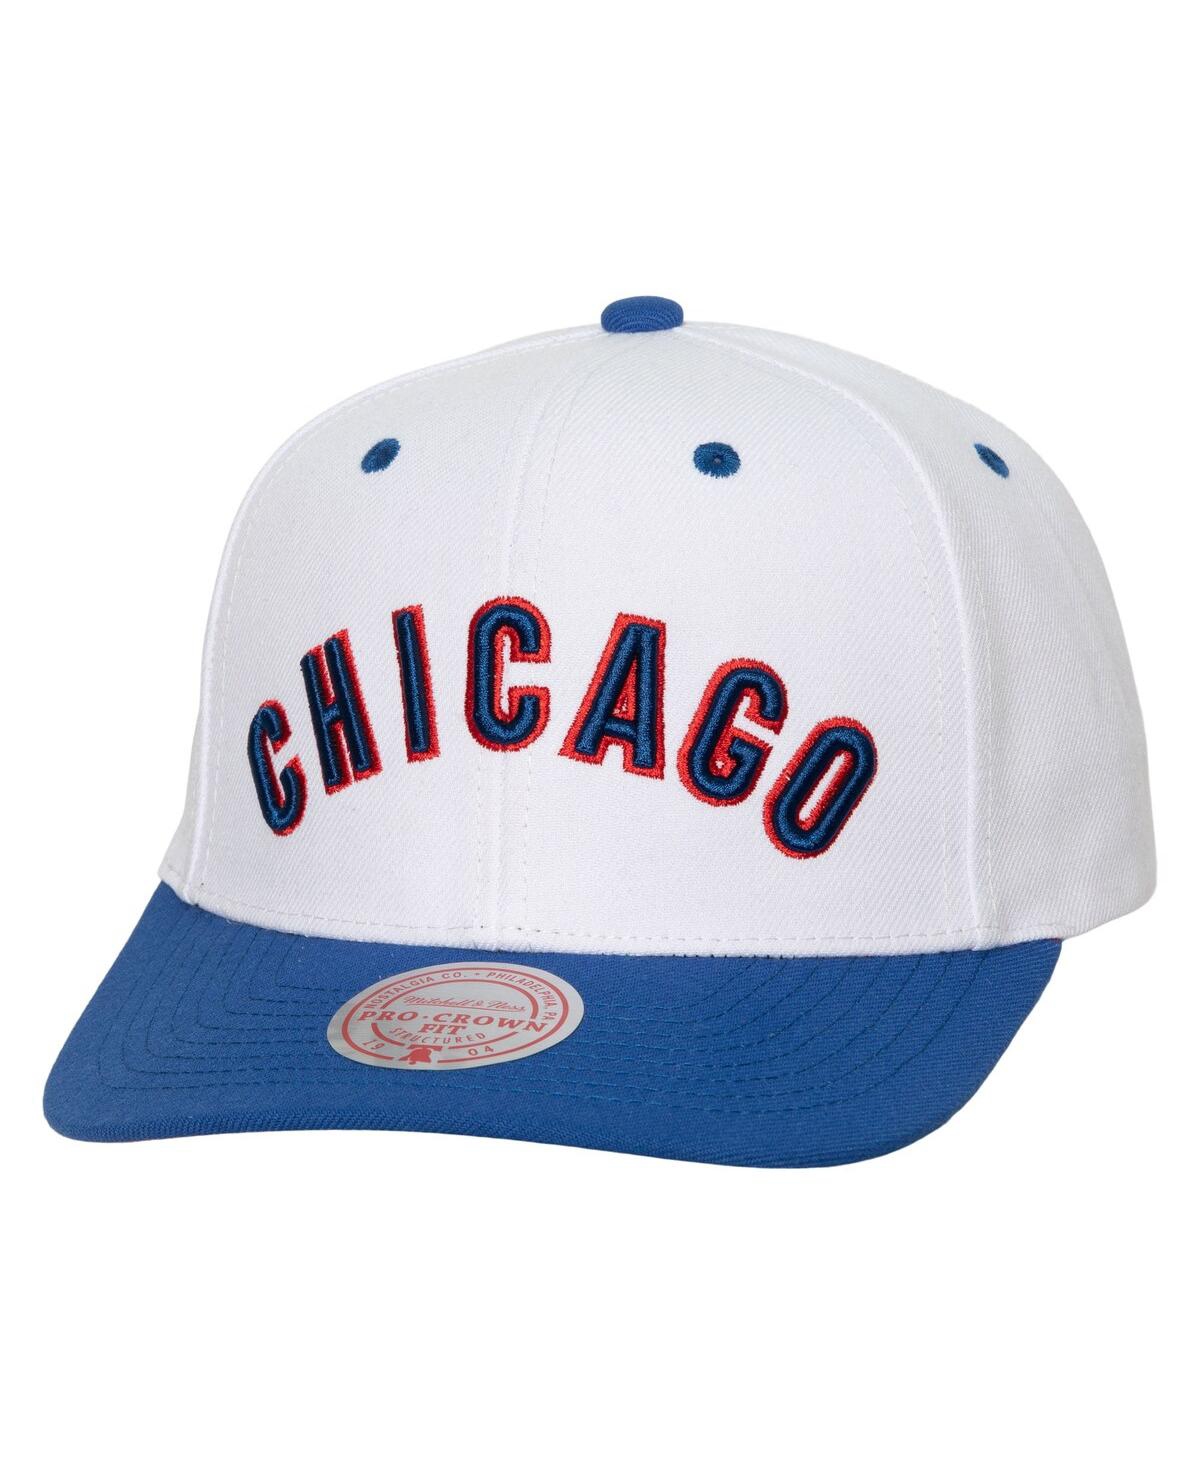 Mitchell & Ness Men's  White Chicago Cubs Cooperstown Collection Pro Crown Snapback Hat